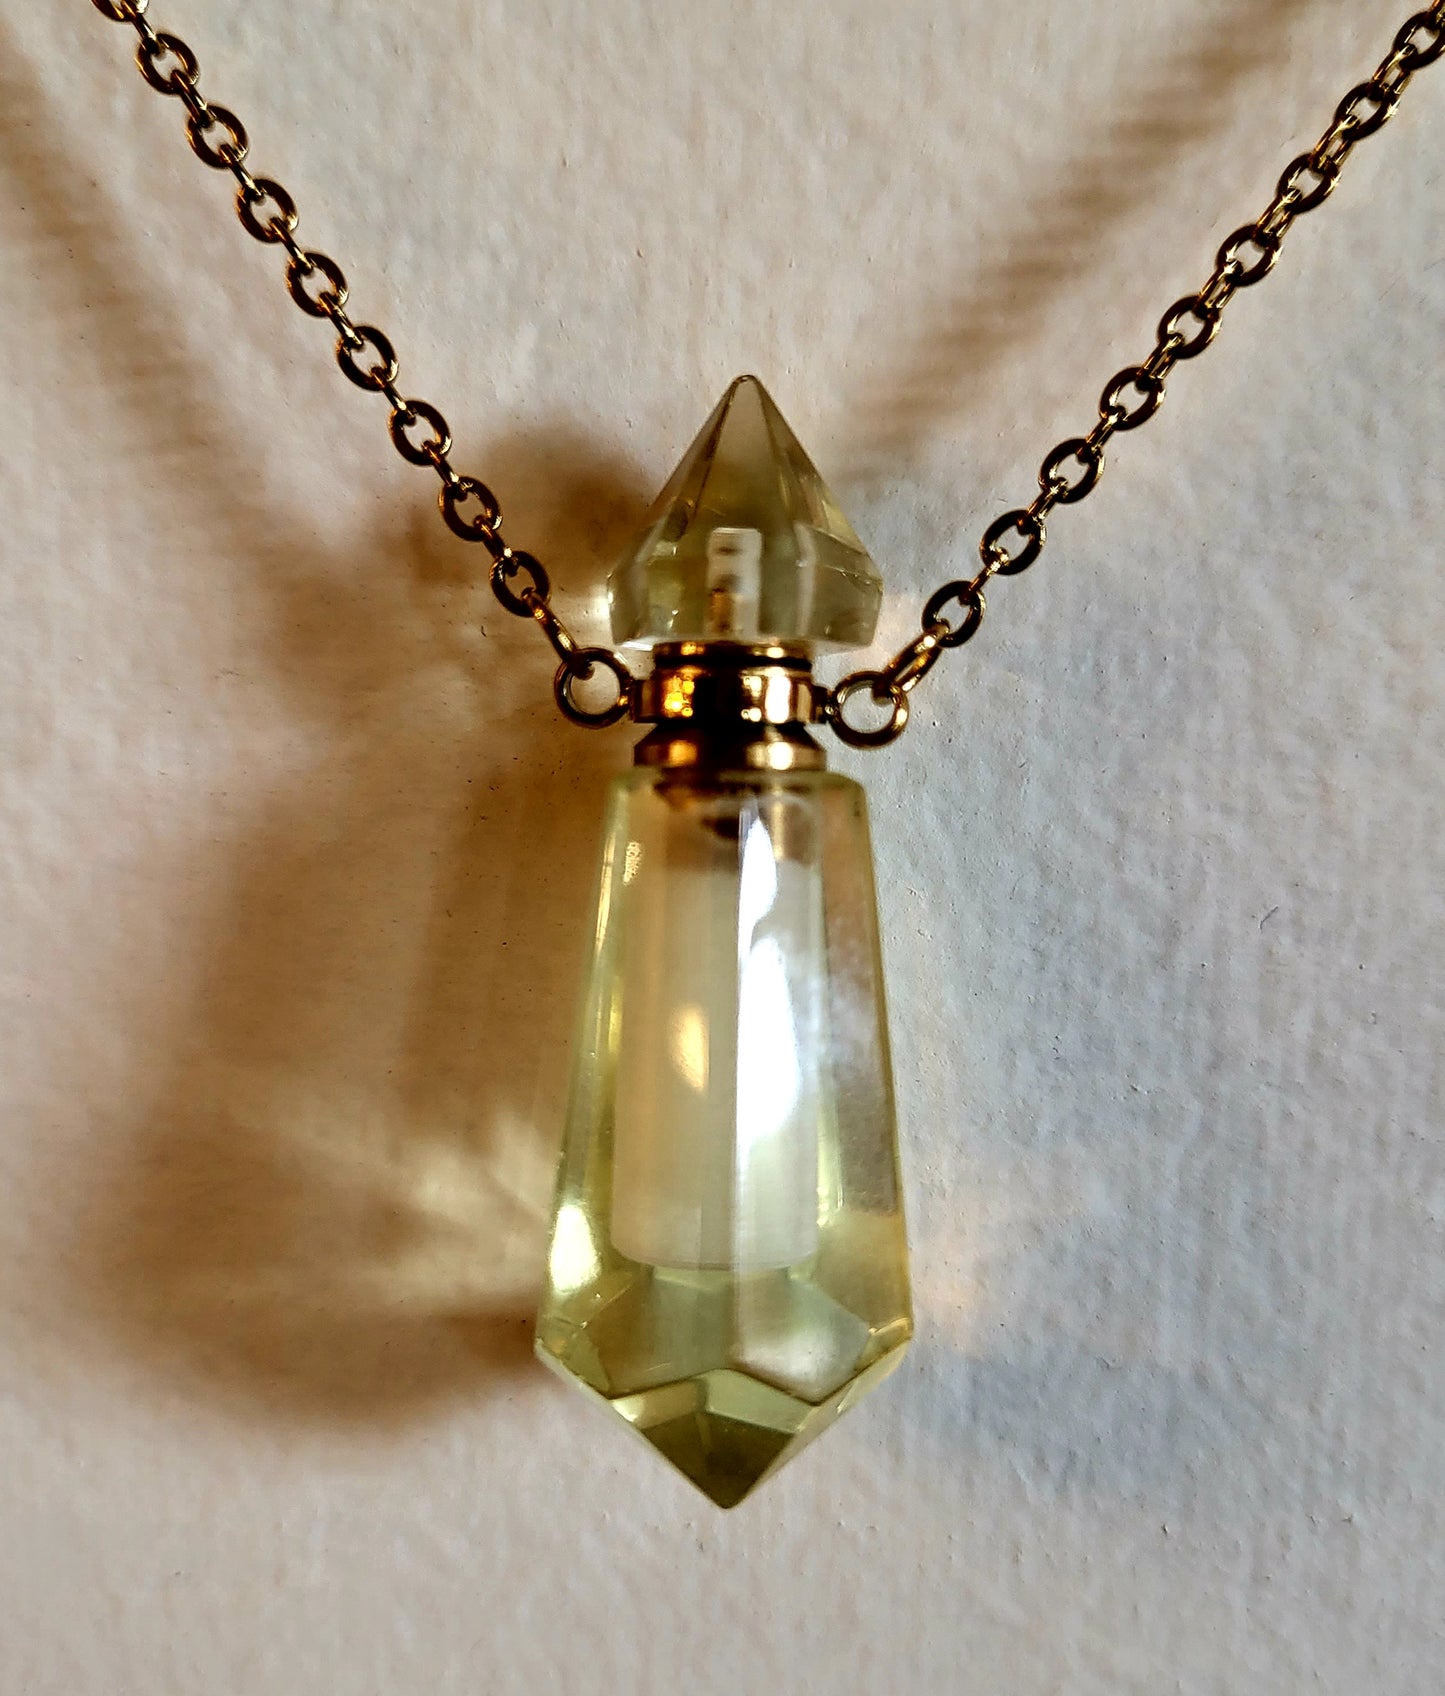 Citrine Oil Bottle Necklace - promotes motivation, activates creativity and encourages self-expression